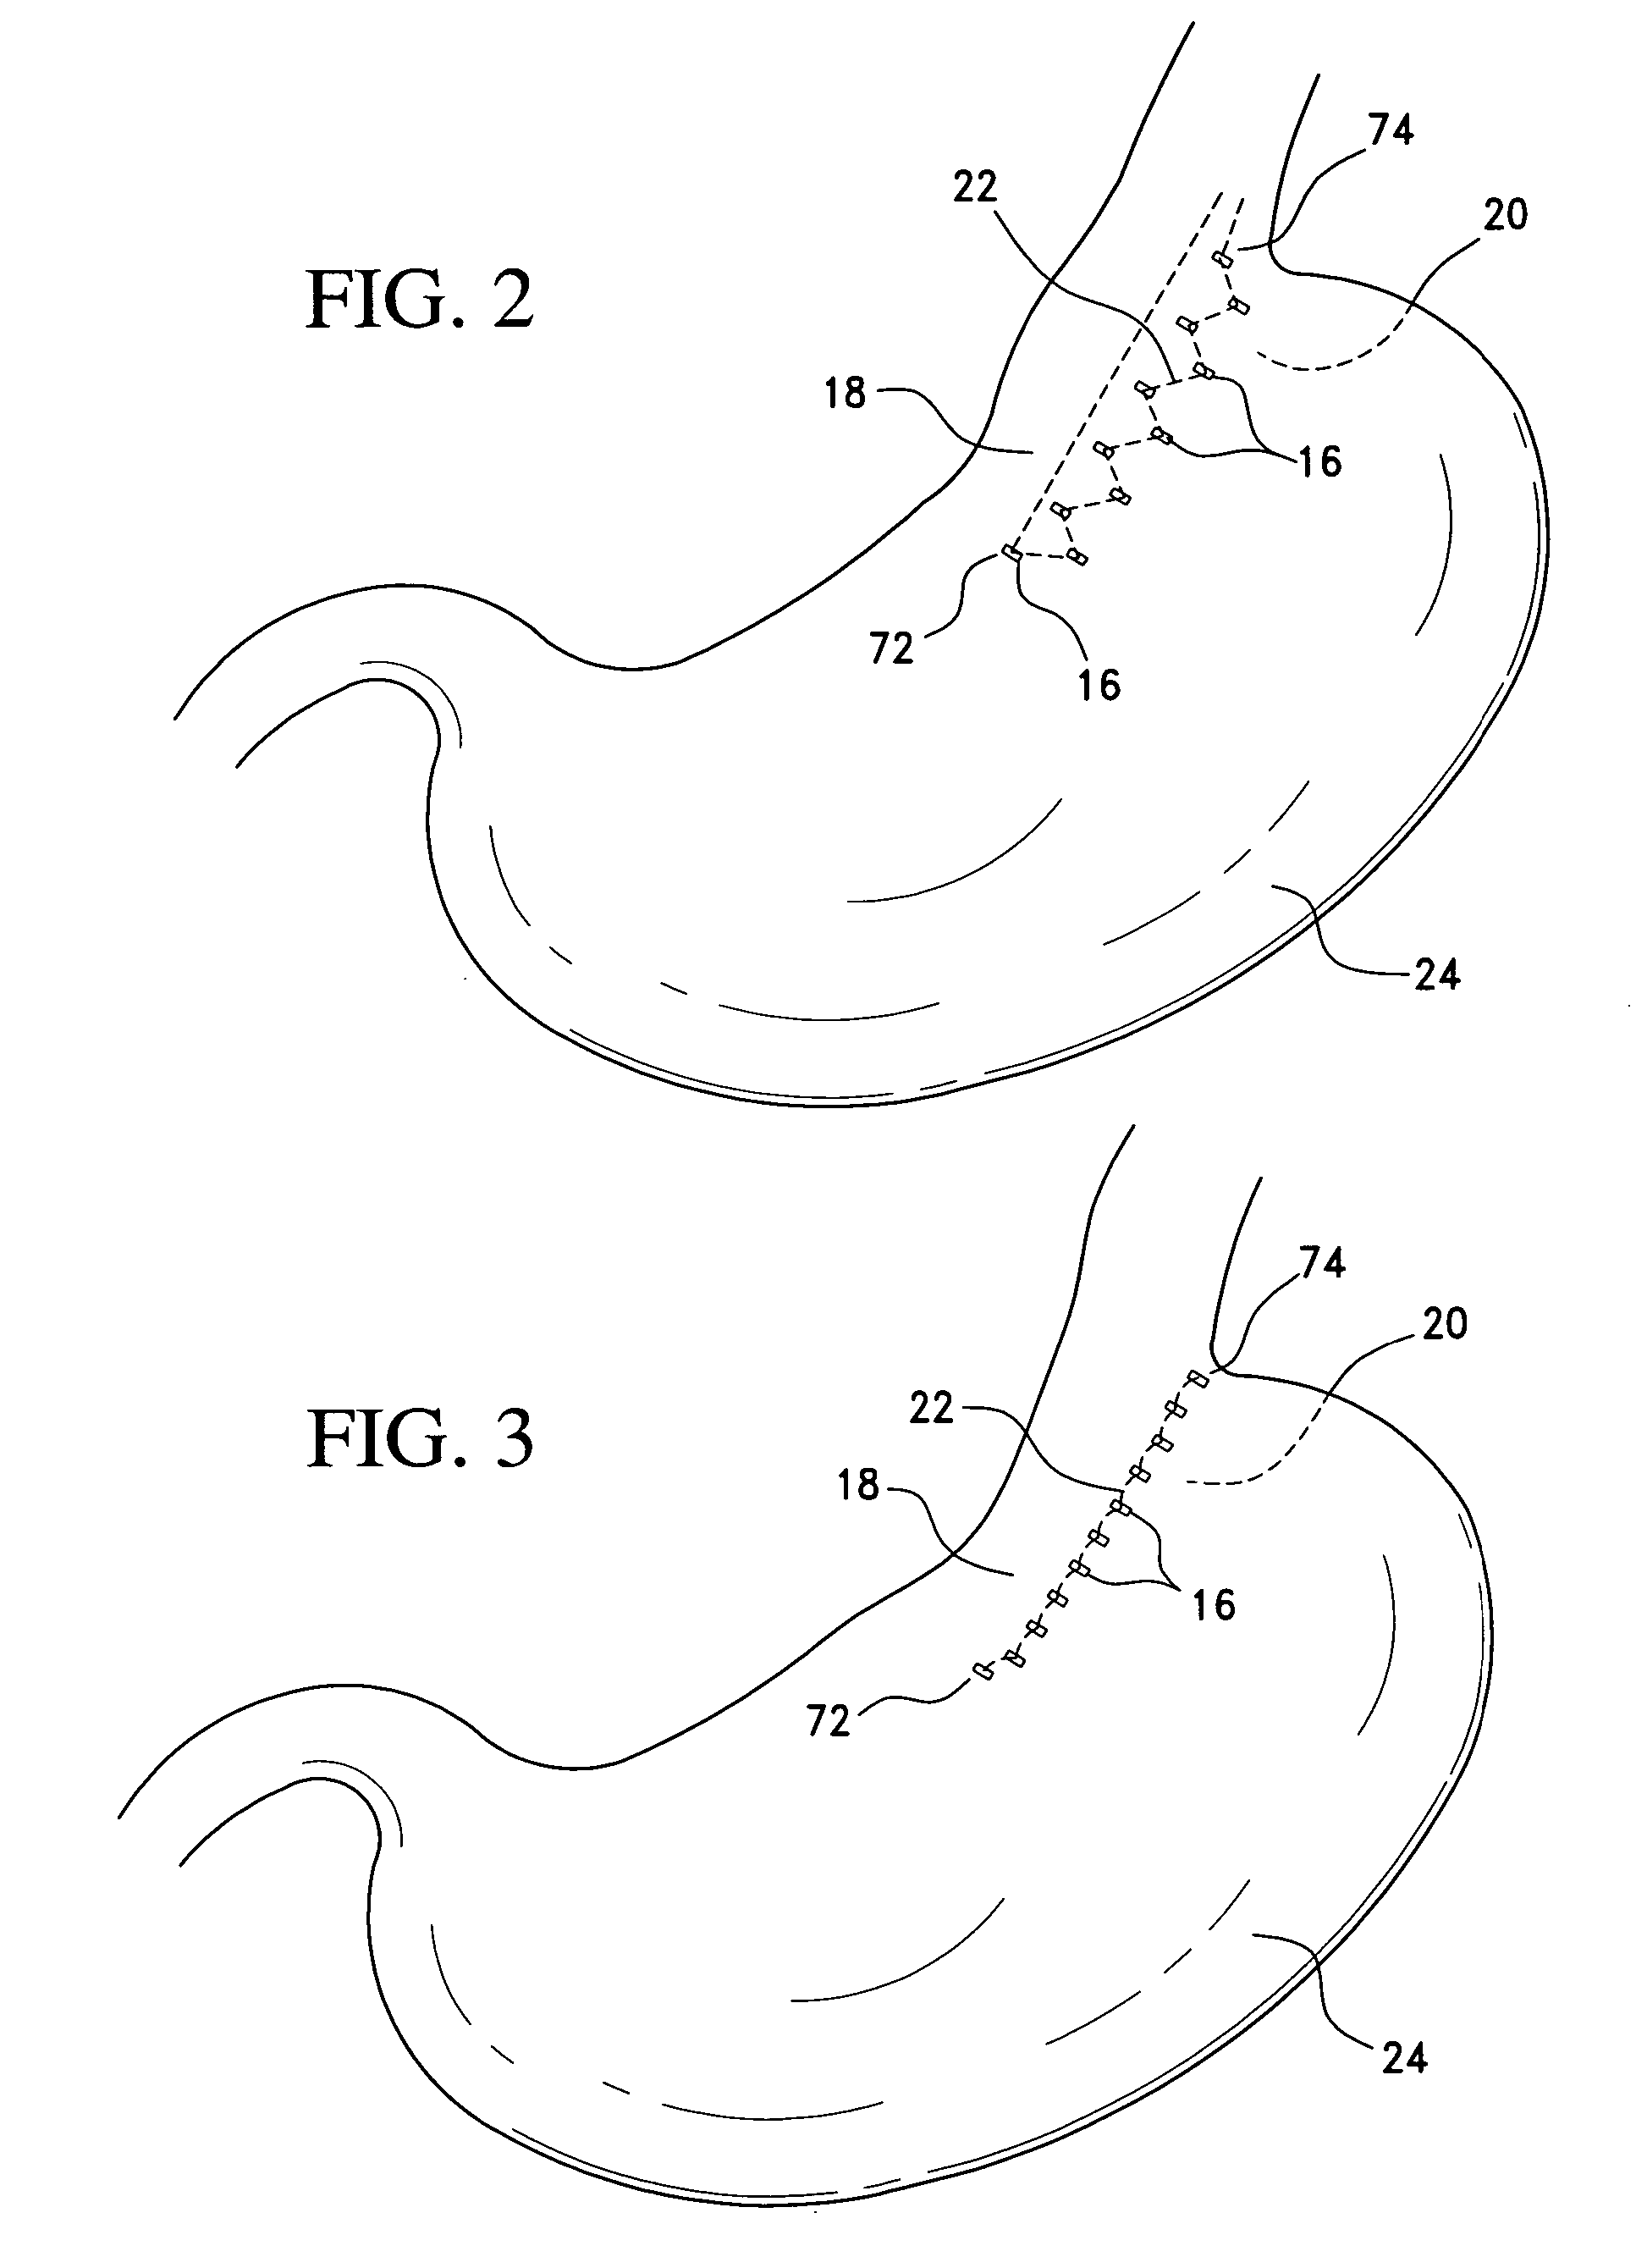 Method and apparatus for endoscopically performing gastric reduction surgery in a single step